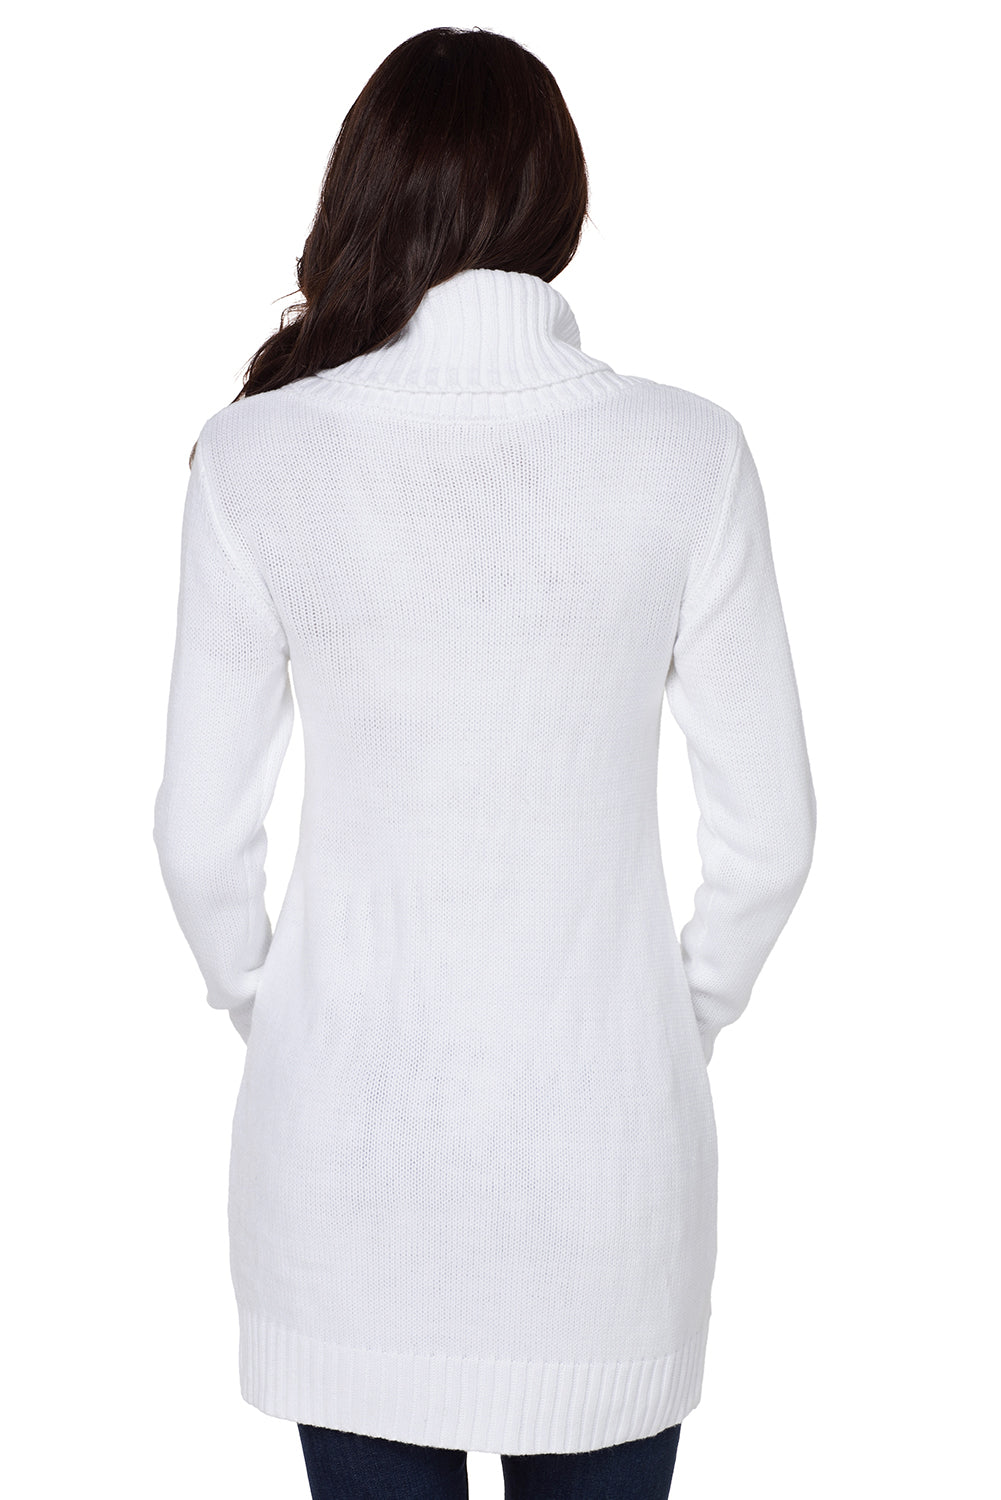 Robe Pull en Tricoter Blanche Col Roule